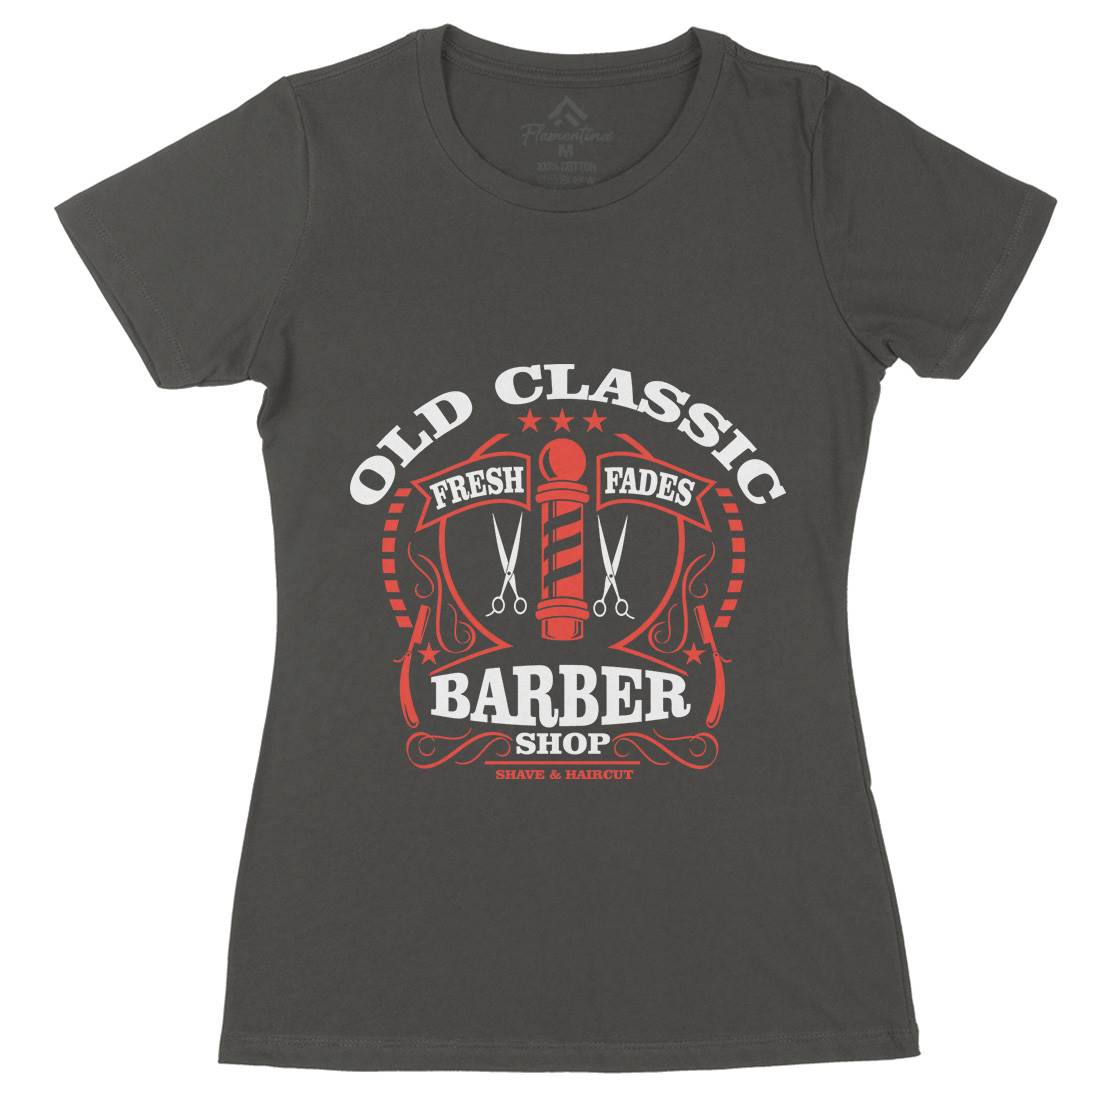 Old Classic Womens Organic Crew Neck T-Shirt Barber A099